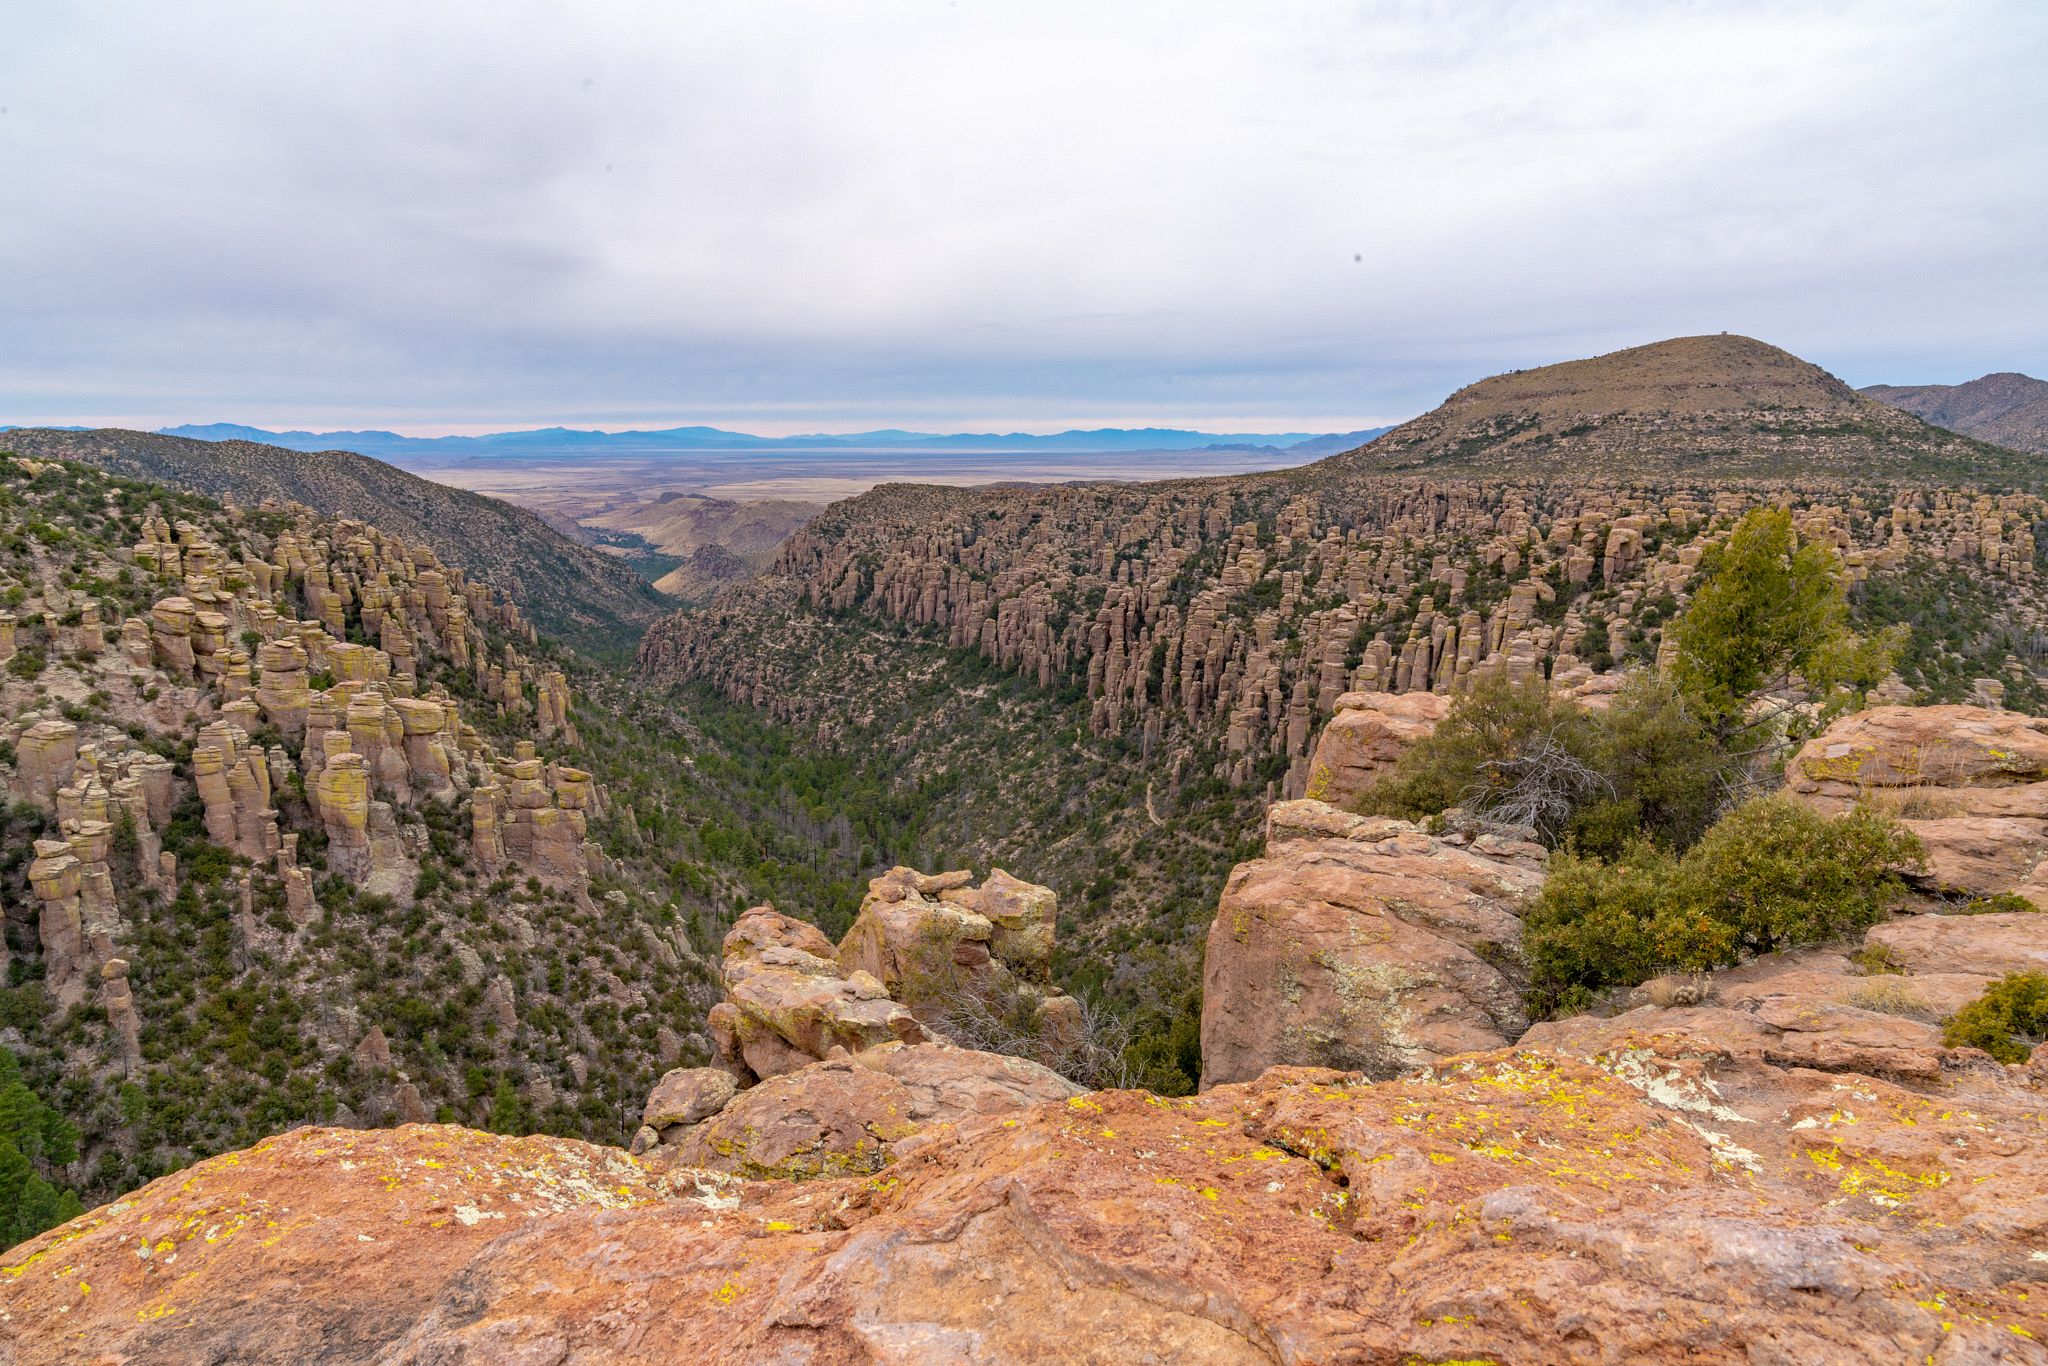 Inspiration Point, Chiricahua National Monument